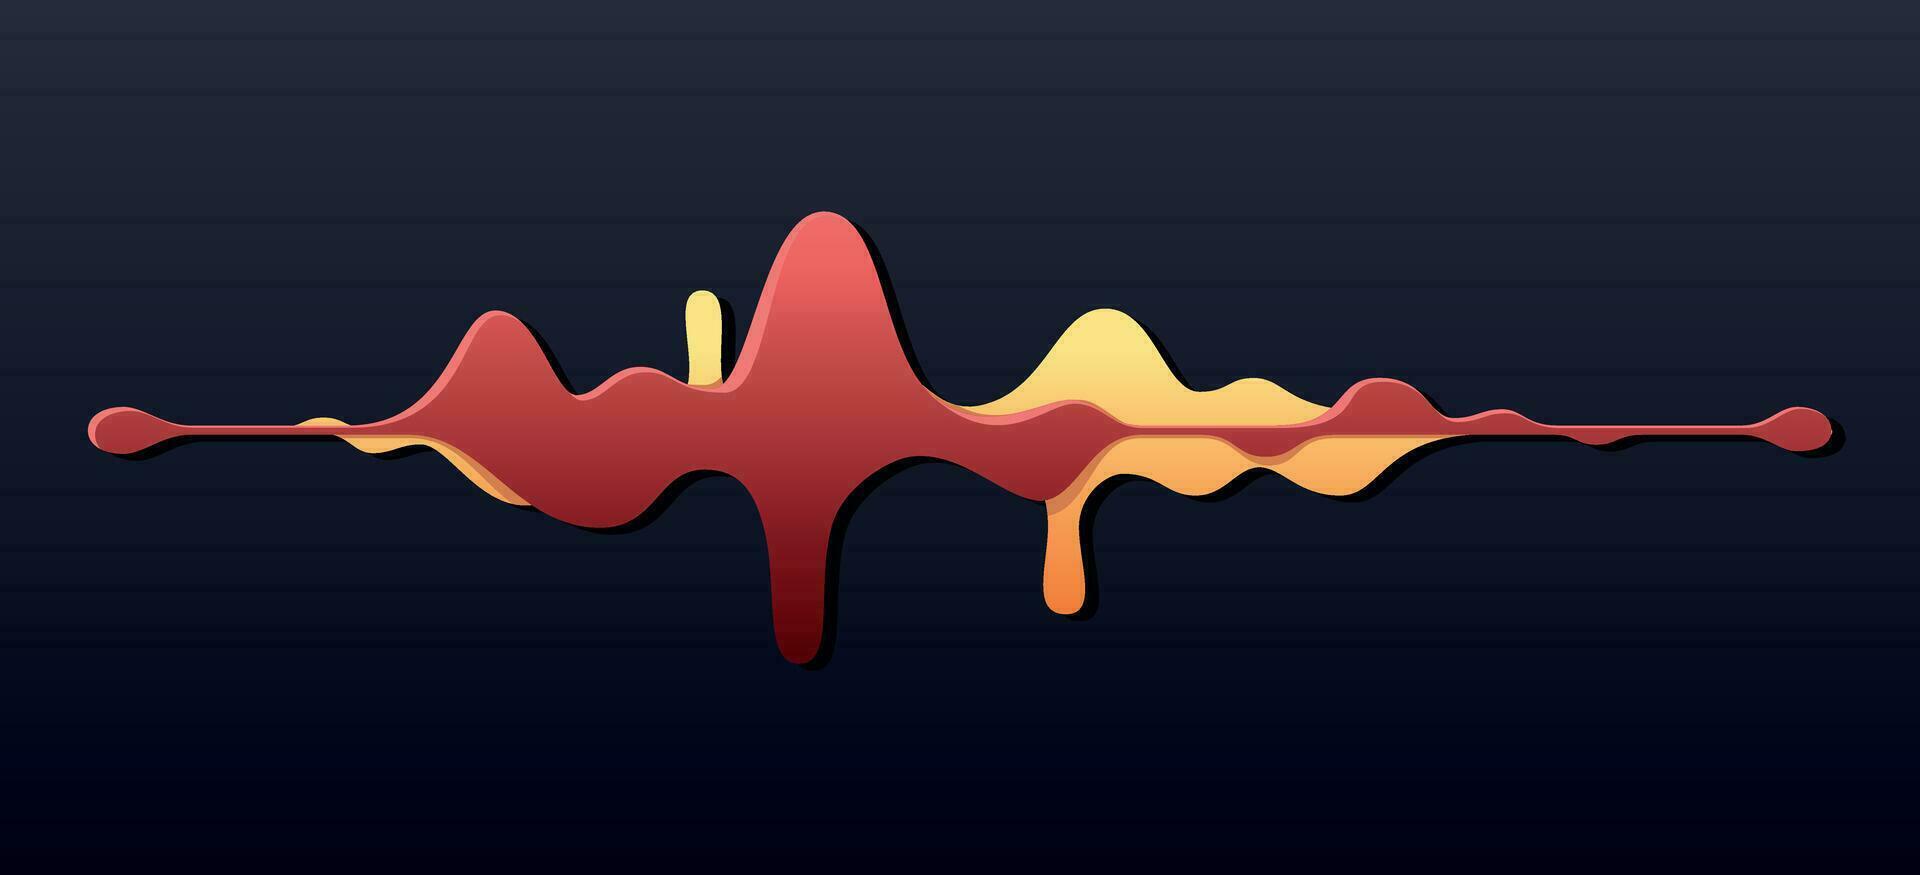 Illustration of a double sound wave vector